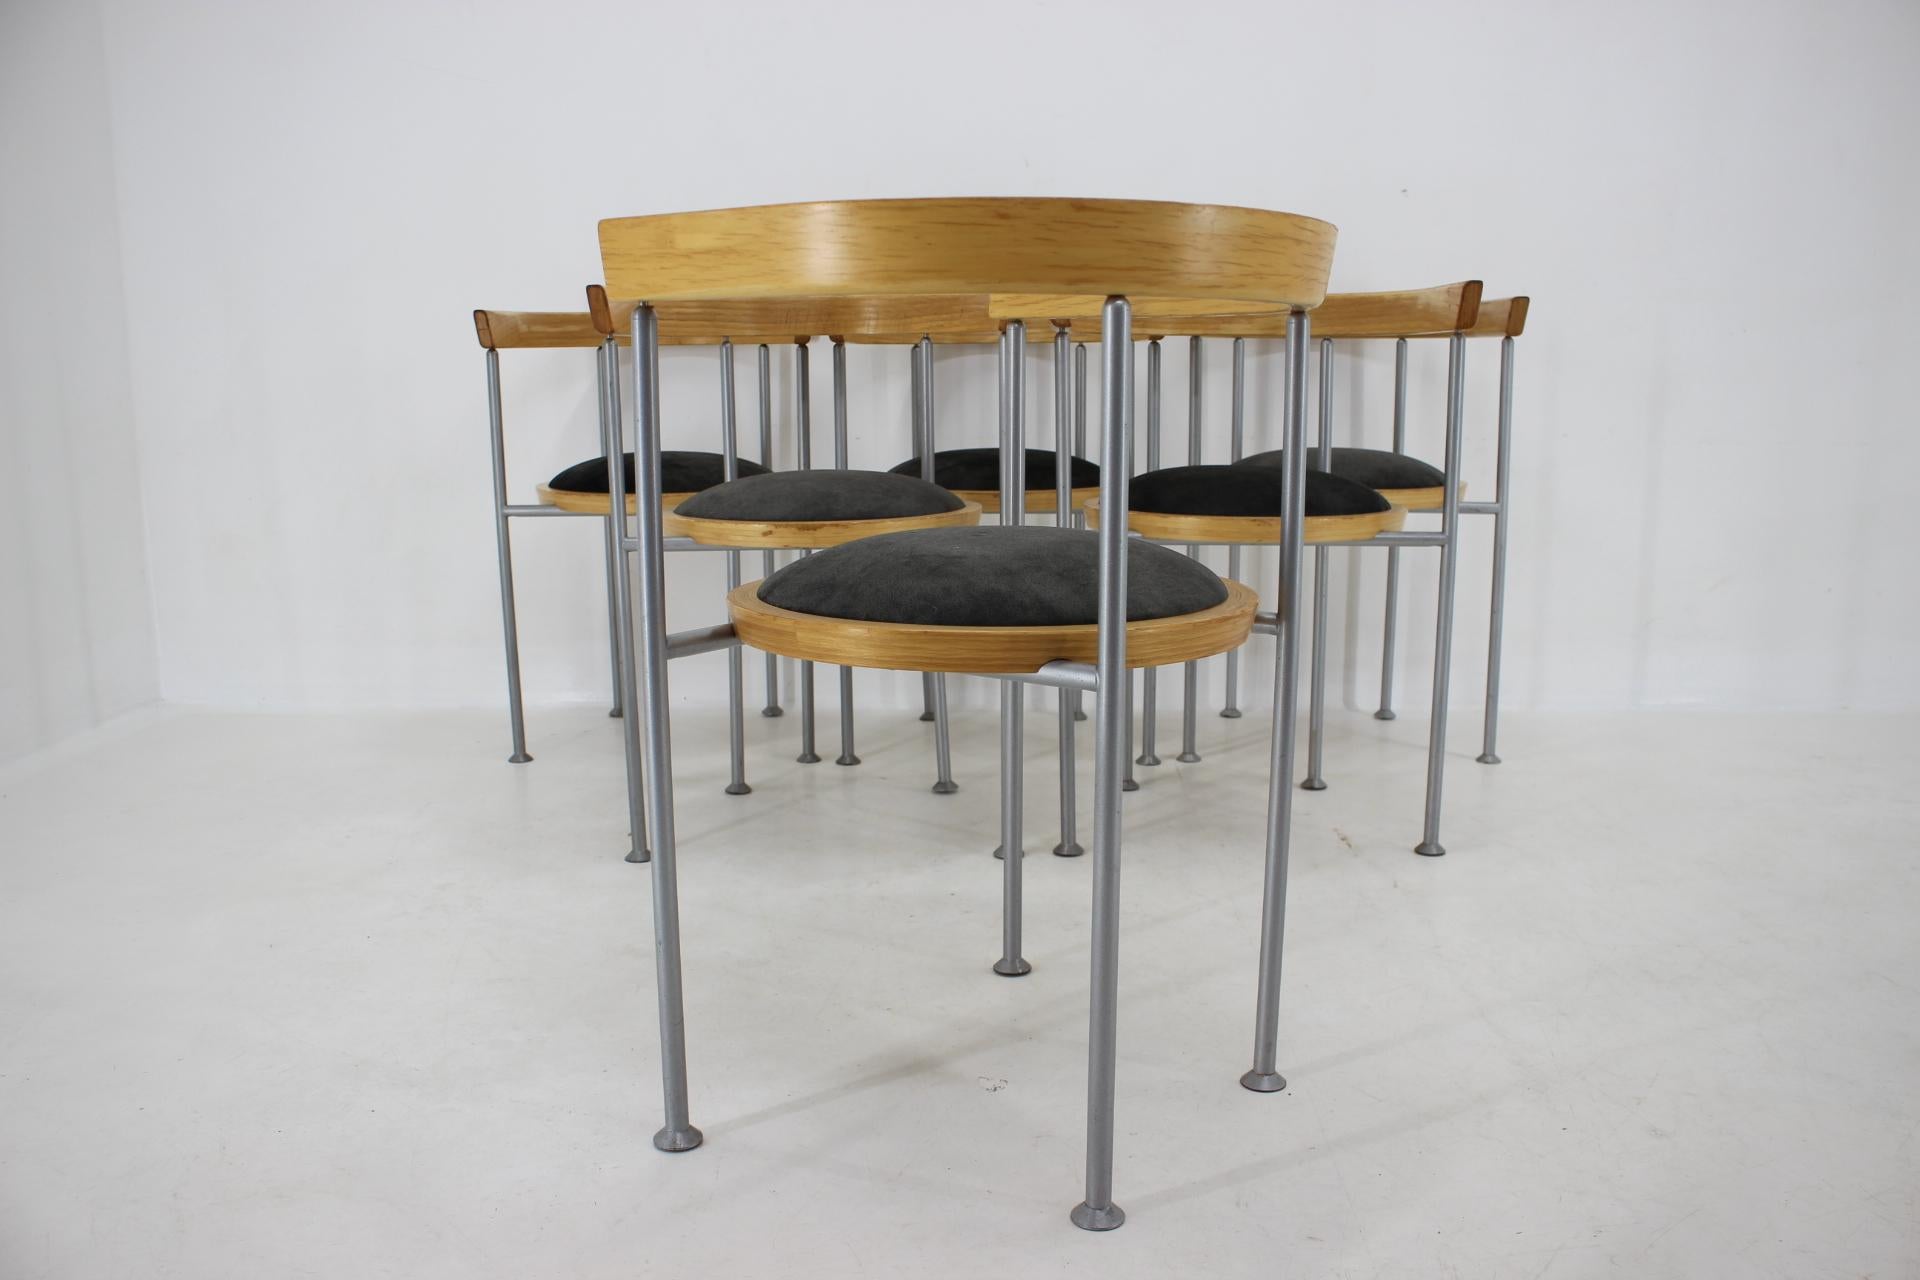 1990s Borge Lindau Set of 6 Dining Chairs for Bla Station, Sweden For Sale 2